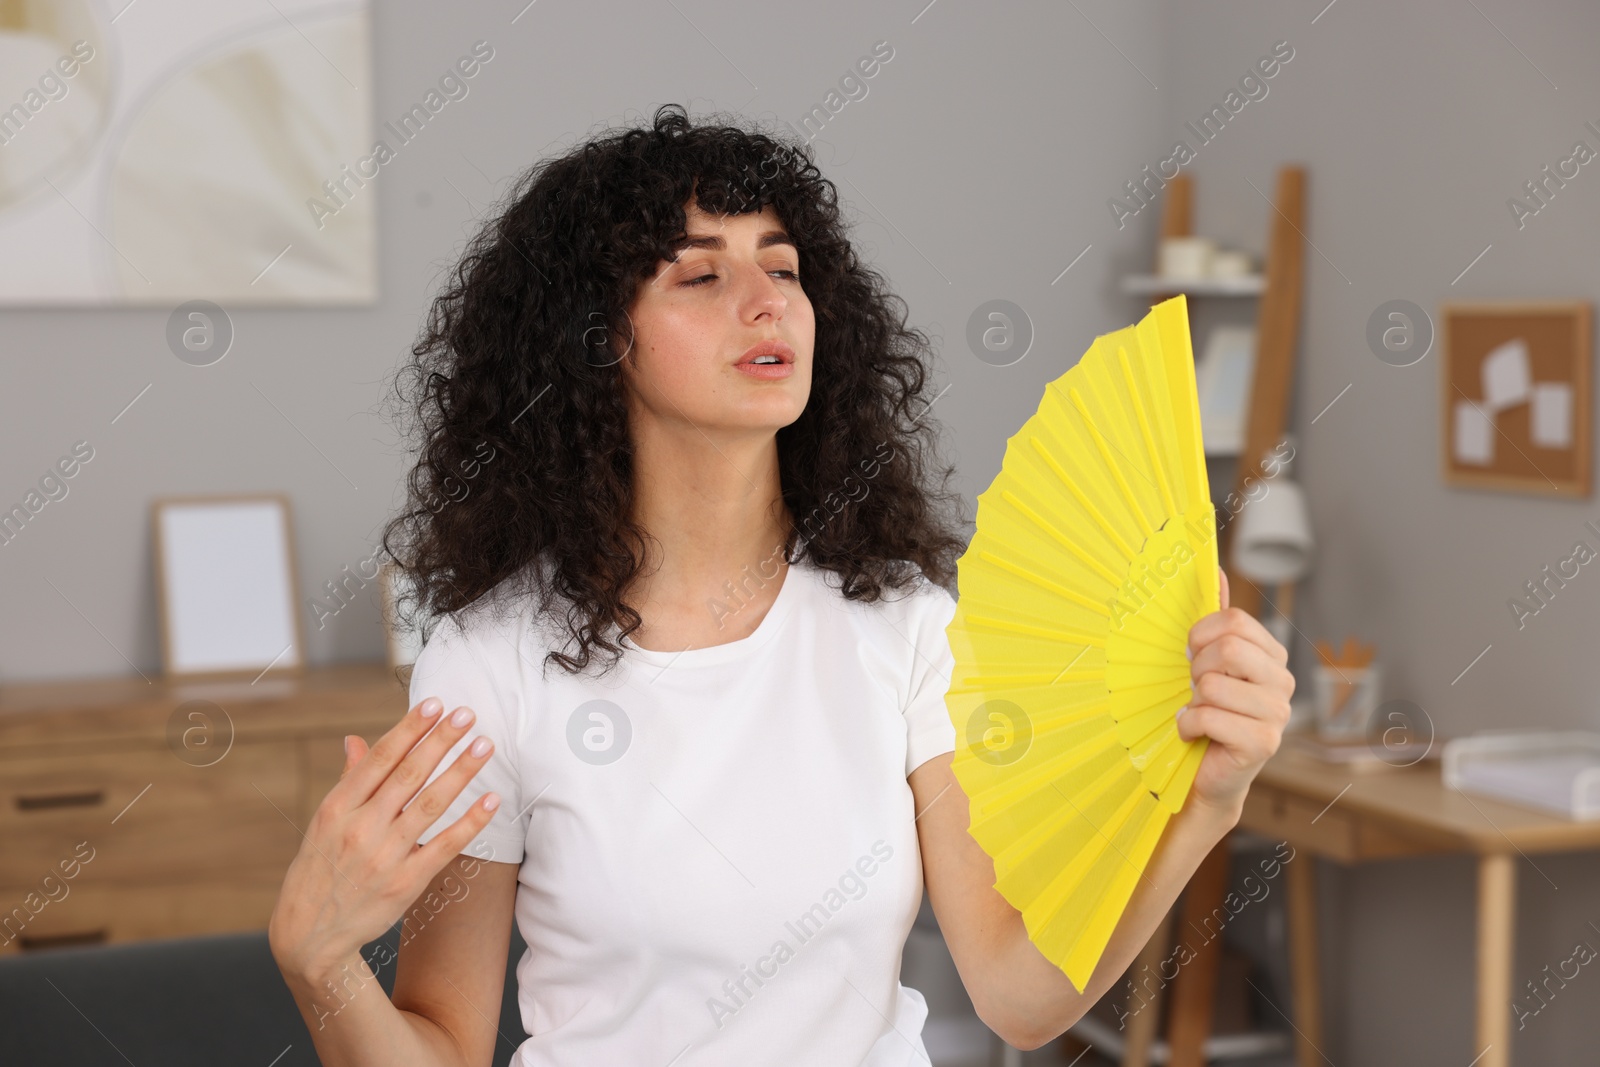 Photo of Young woman waving yellow hand fan to cool herself at home